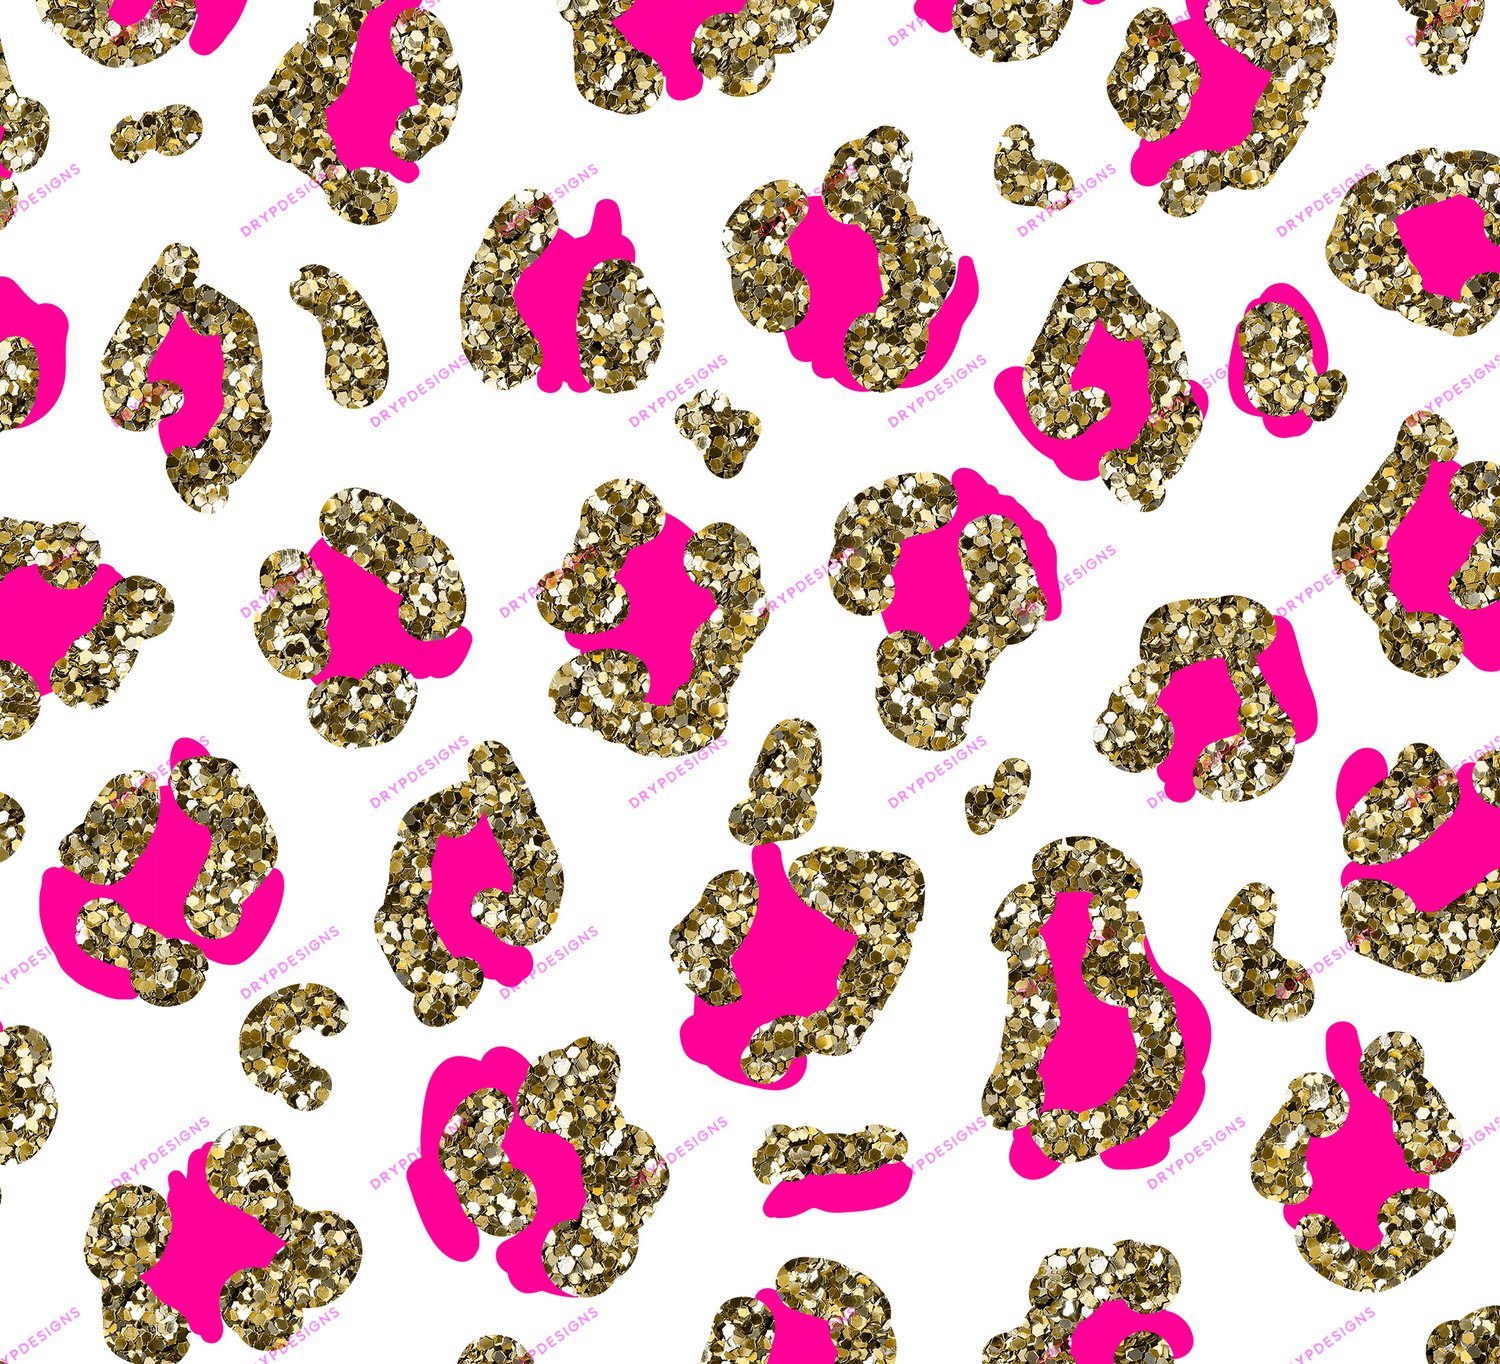 Gold Glitter Pink Leopard Print Seamless Pattern Drypdesigns